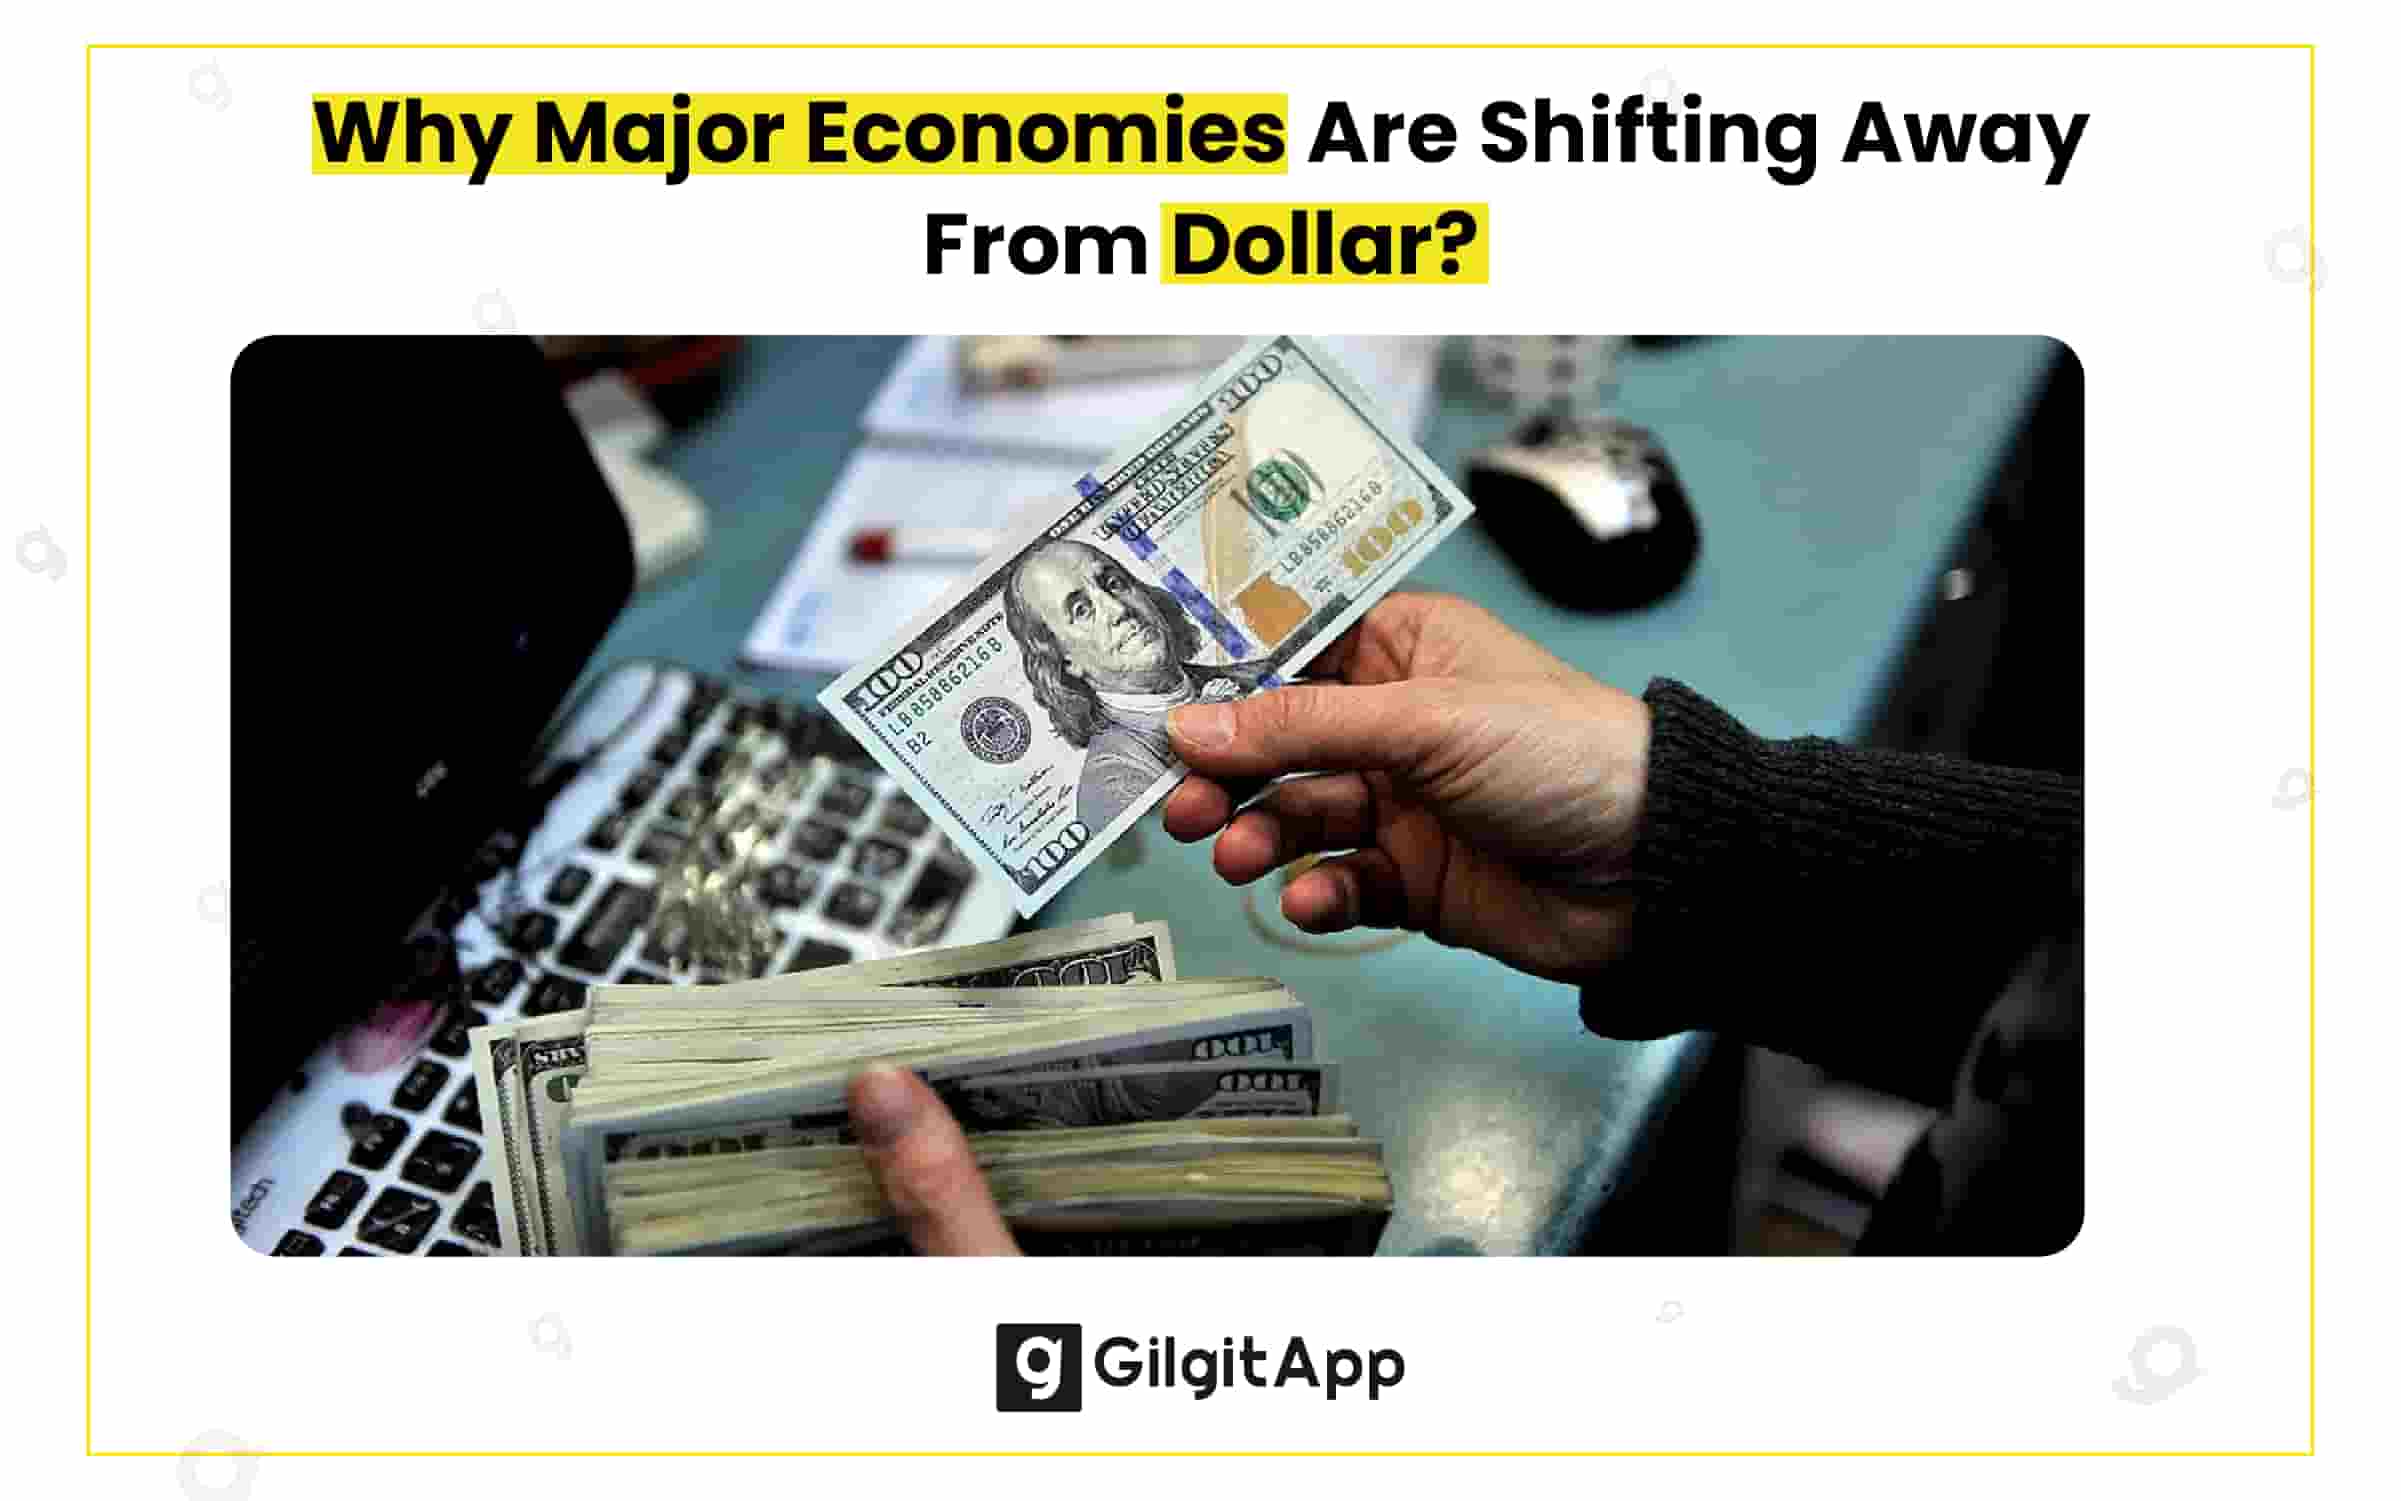 Why Major Economies Are Shifting Away From Dollar?